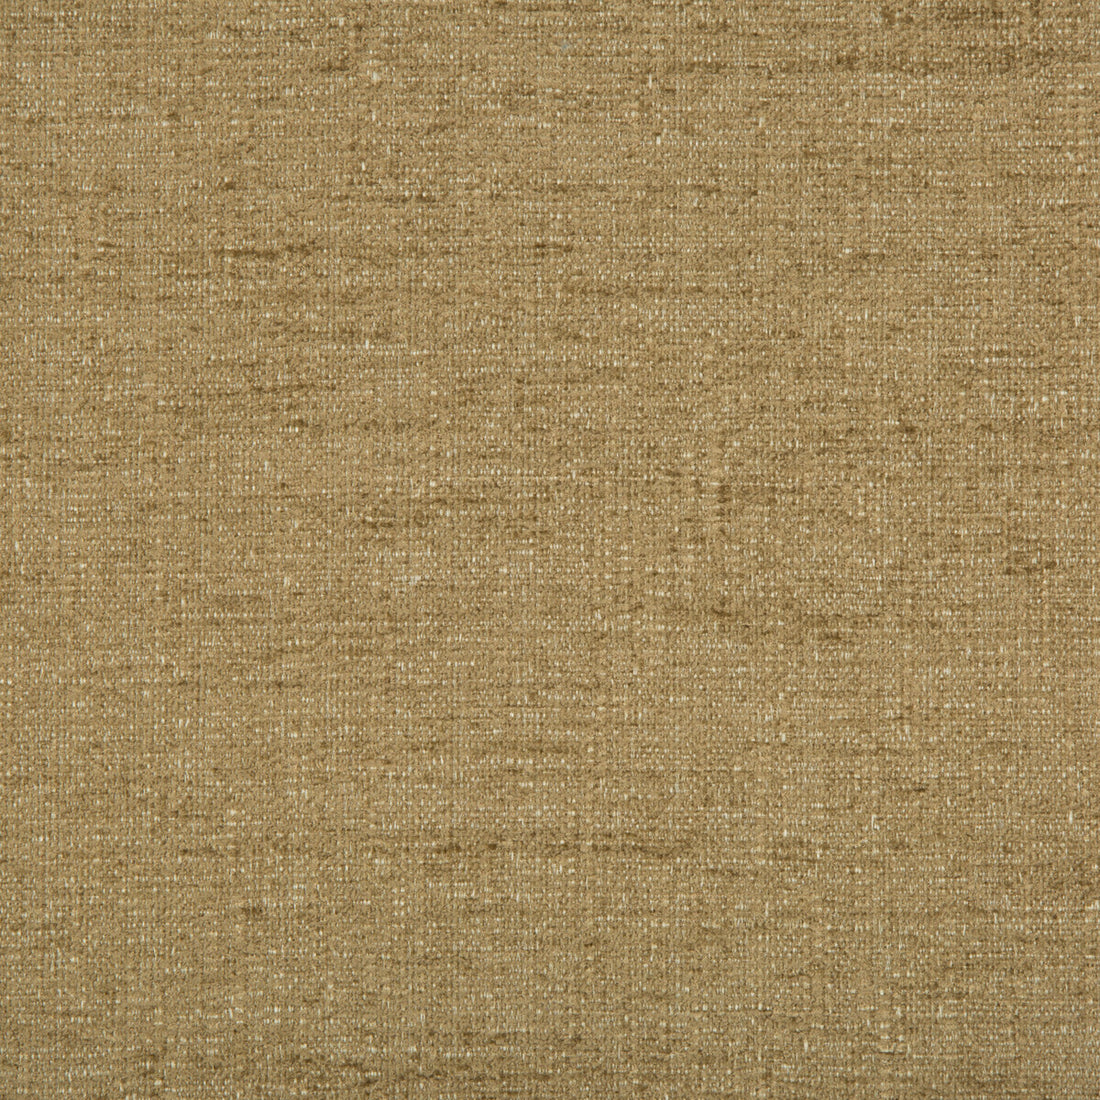 Kravet Contract fabric in 34636-616 color - pattern 34636.616.0 - by Kravet Contract in the Crypton Incase collection